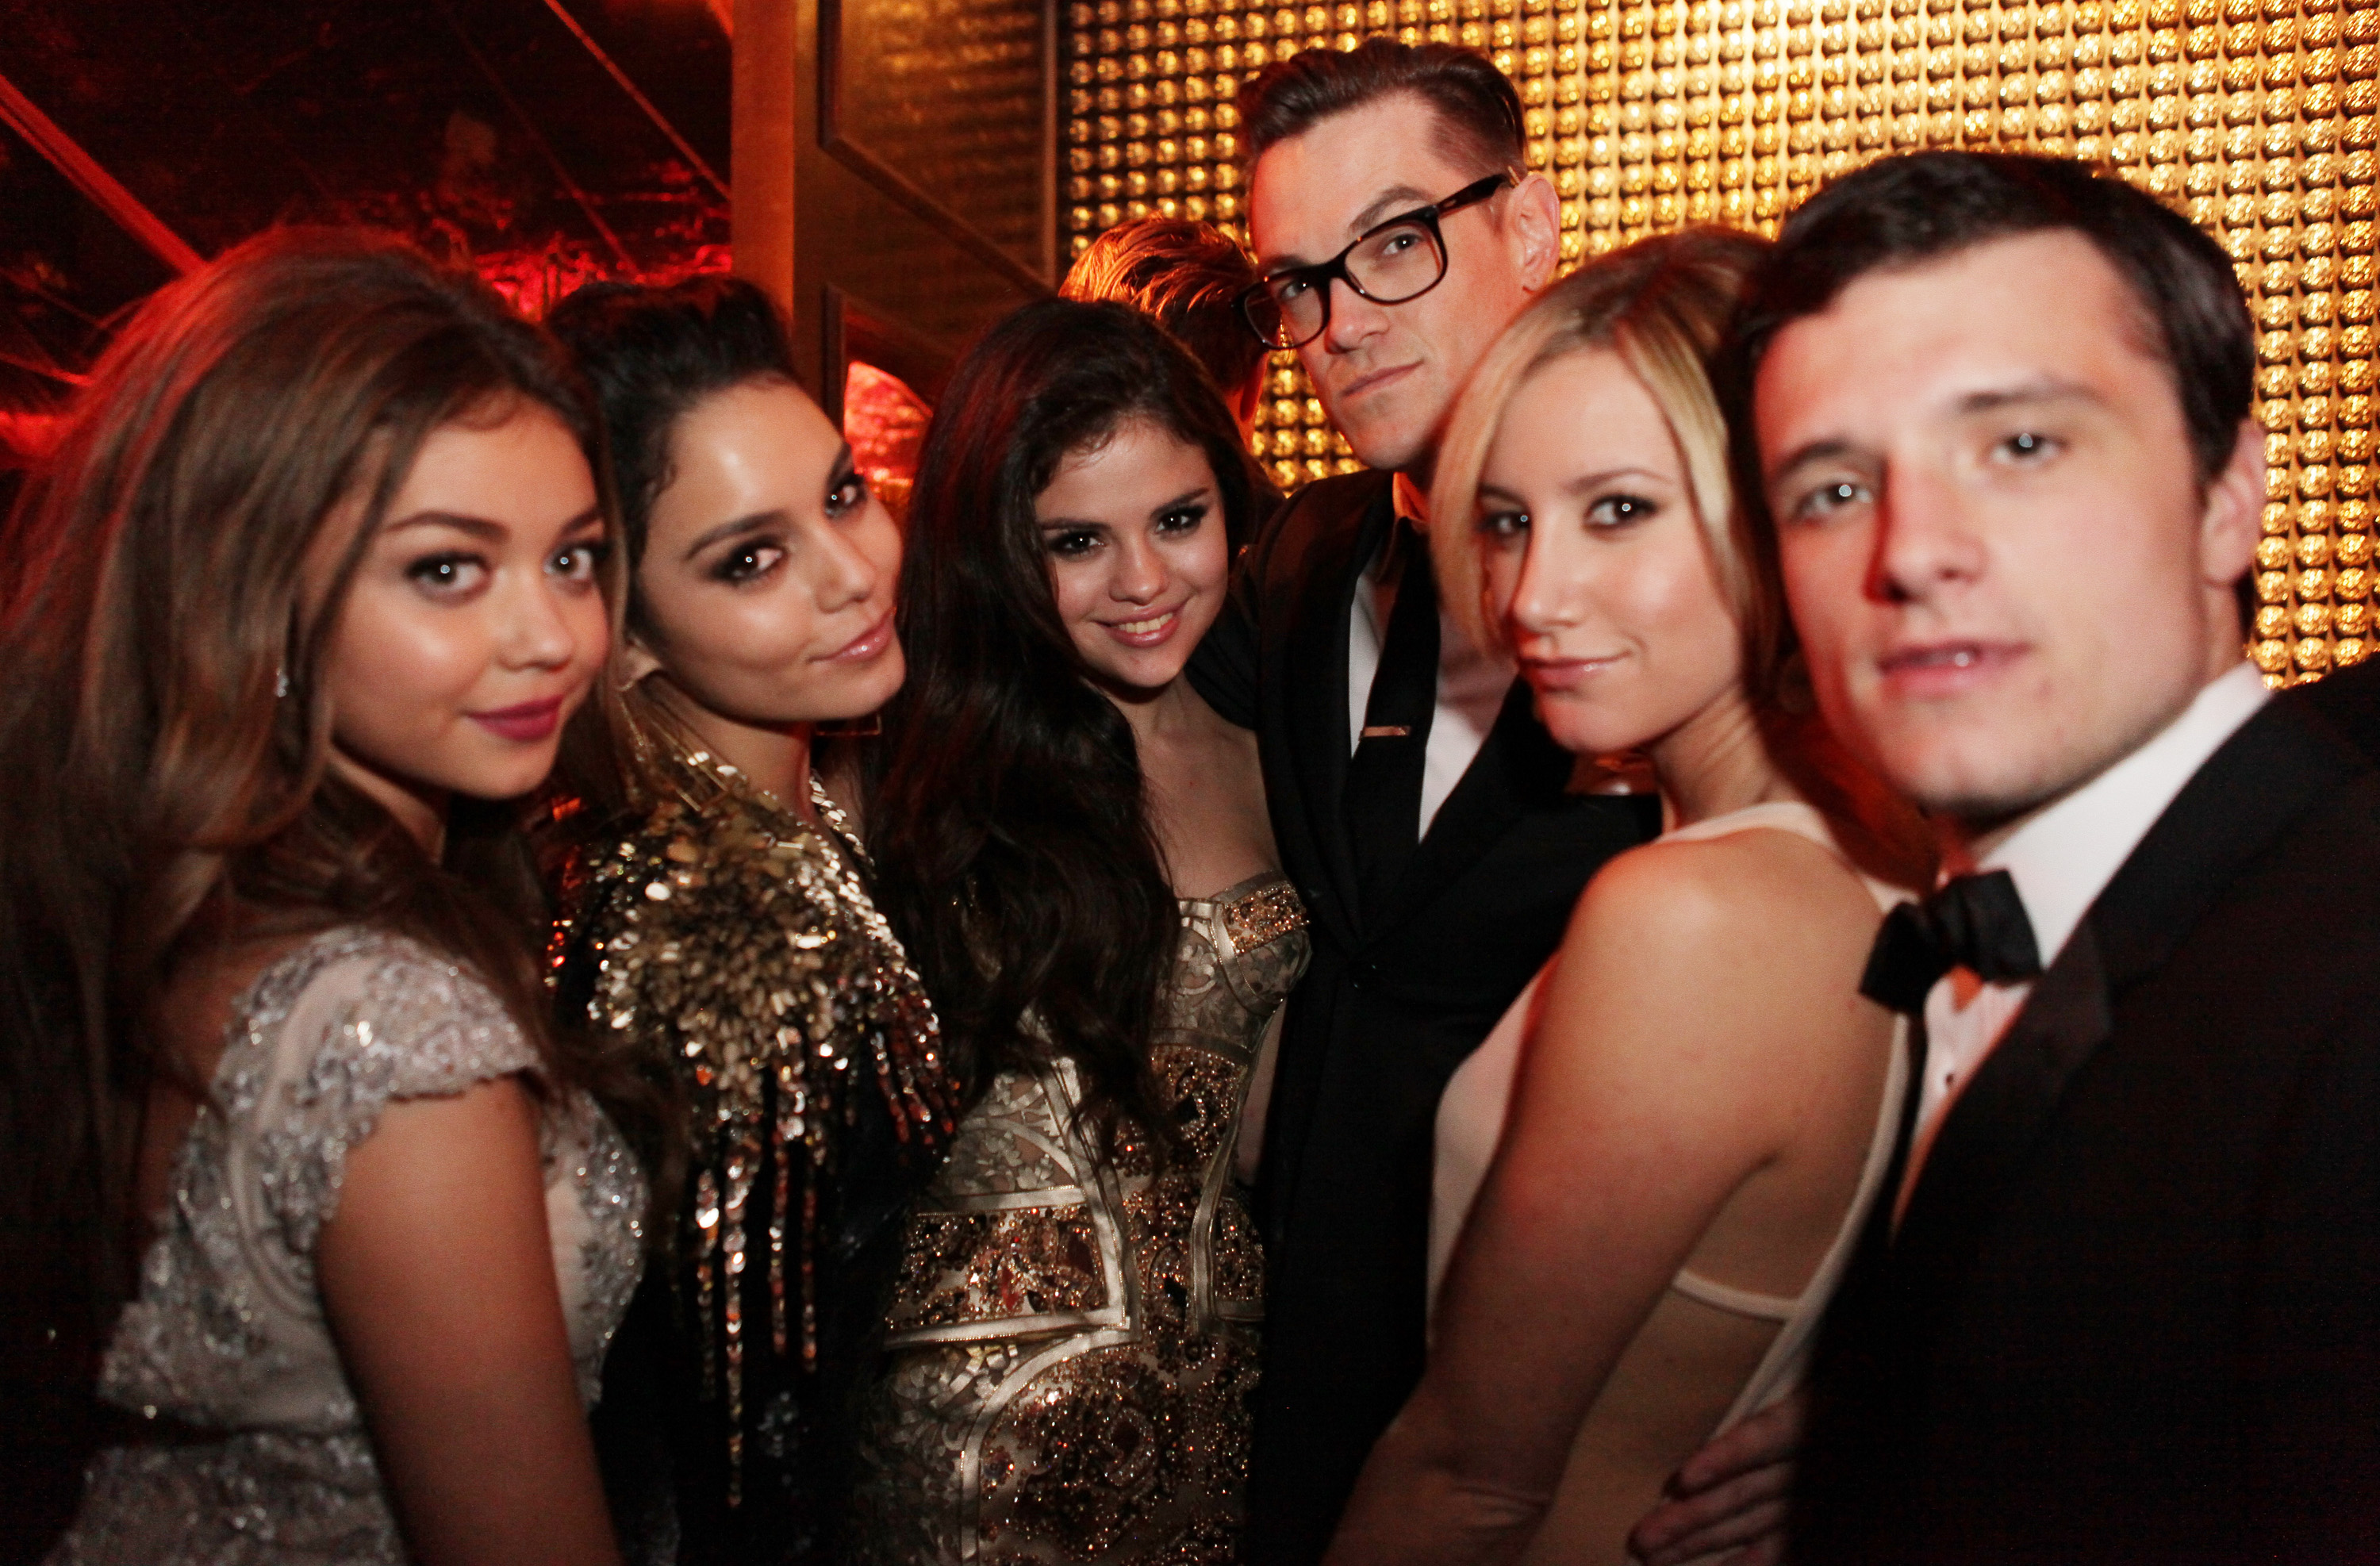 BEVERLY HILLS, CA - JANUARY 13:  Actors Sarah Hyland, Vanessa Hudson, Selena Gomez, Ashley Tisdale and Josh Hutcherson attends the The Weinstein Company's 2013 Golden Globe Awards after party presented by Chopard, HP, Laura Mercier, Lexus, Marie Claire, and Yucaipa Films held at The Old Trader Vic's at The Beverly Hilton Hotel on January 13, 2013 in Beverly Hills, California.  (Photo by Mike Windle/Getty Images for TWC)